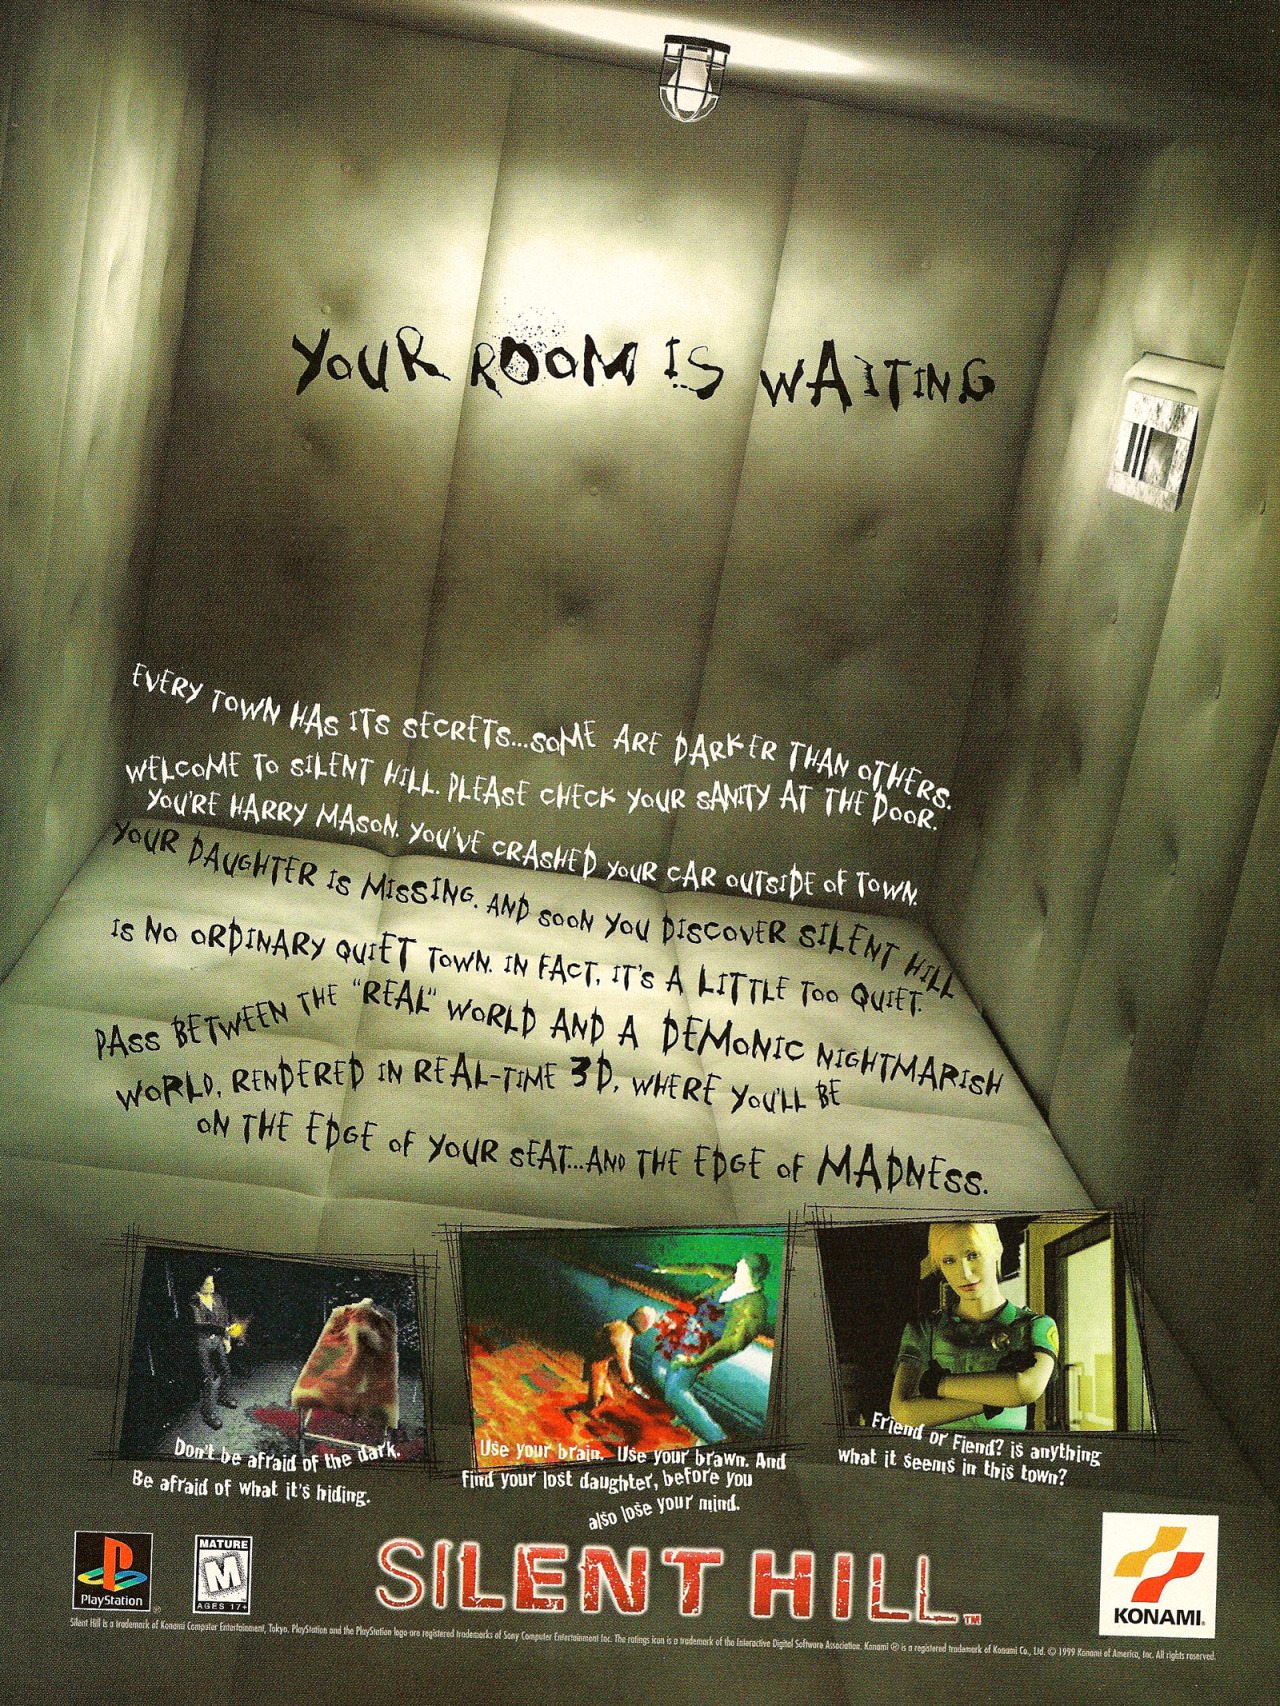 90s video game ads -  silent hill 1 ads - Your Room Is Waiting Every Town Has Its Secrite... Are Parker Than Others Welcome To Clint Will Please Check Your Ganty At The Door You'Re Harry Ma you'Ve Cracked Or Carte De of Town Your Daughter Is Missing And O